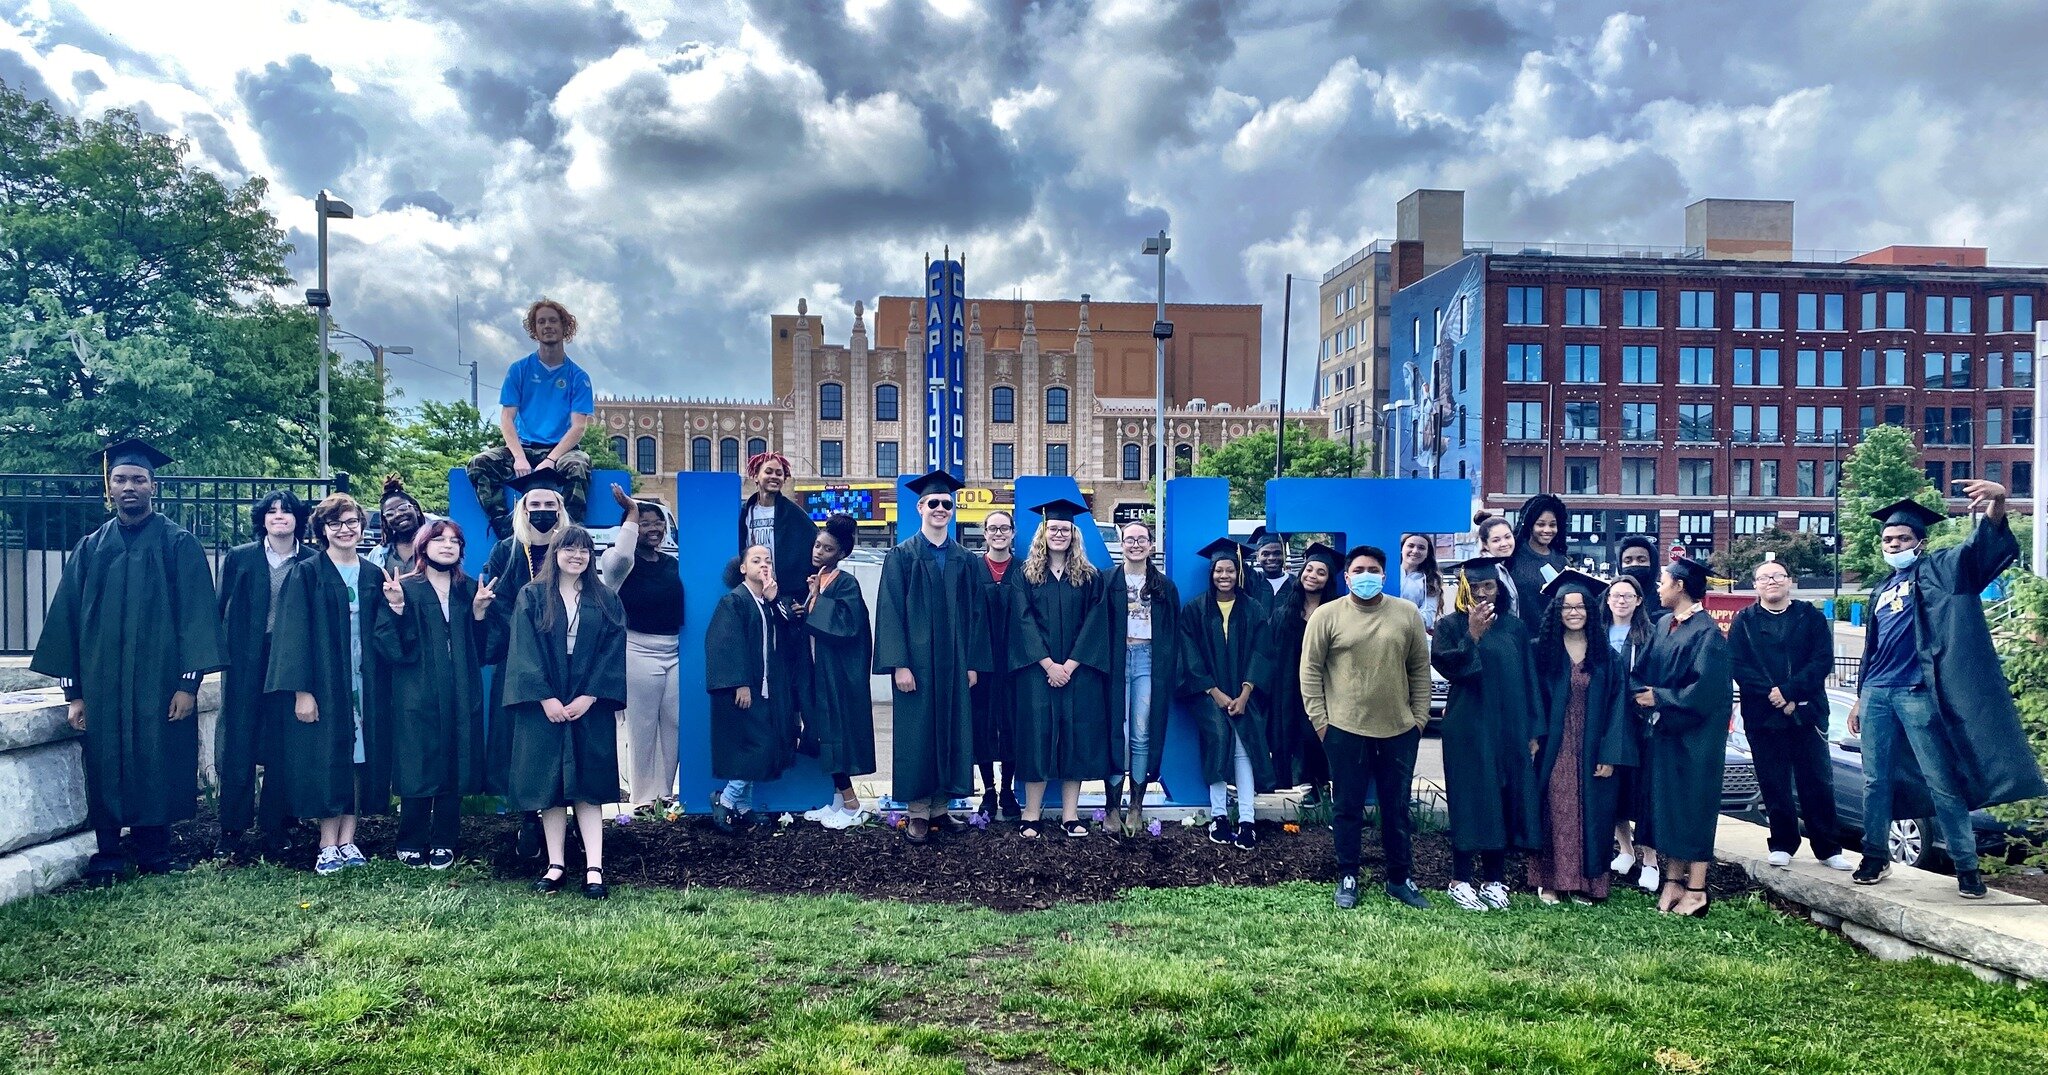 Genesee Early College's class of '22 graduates snap a group photo after their ceremony at The Capitol Theatre in Flint on June 9, 2022.